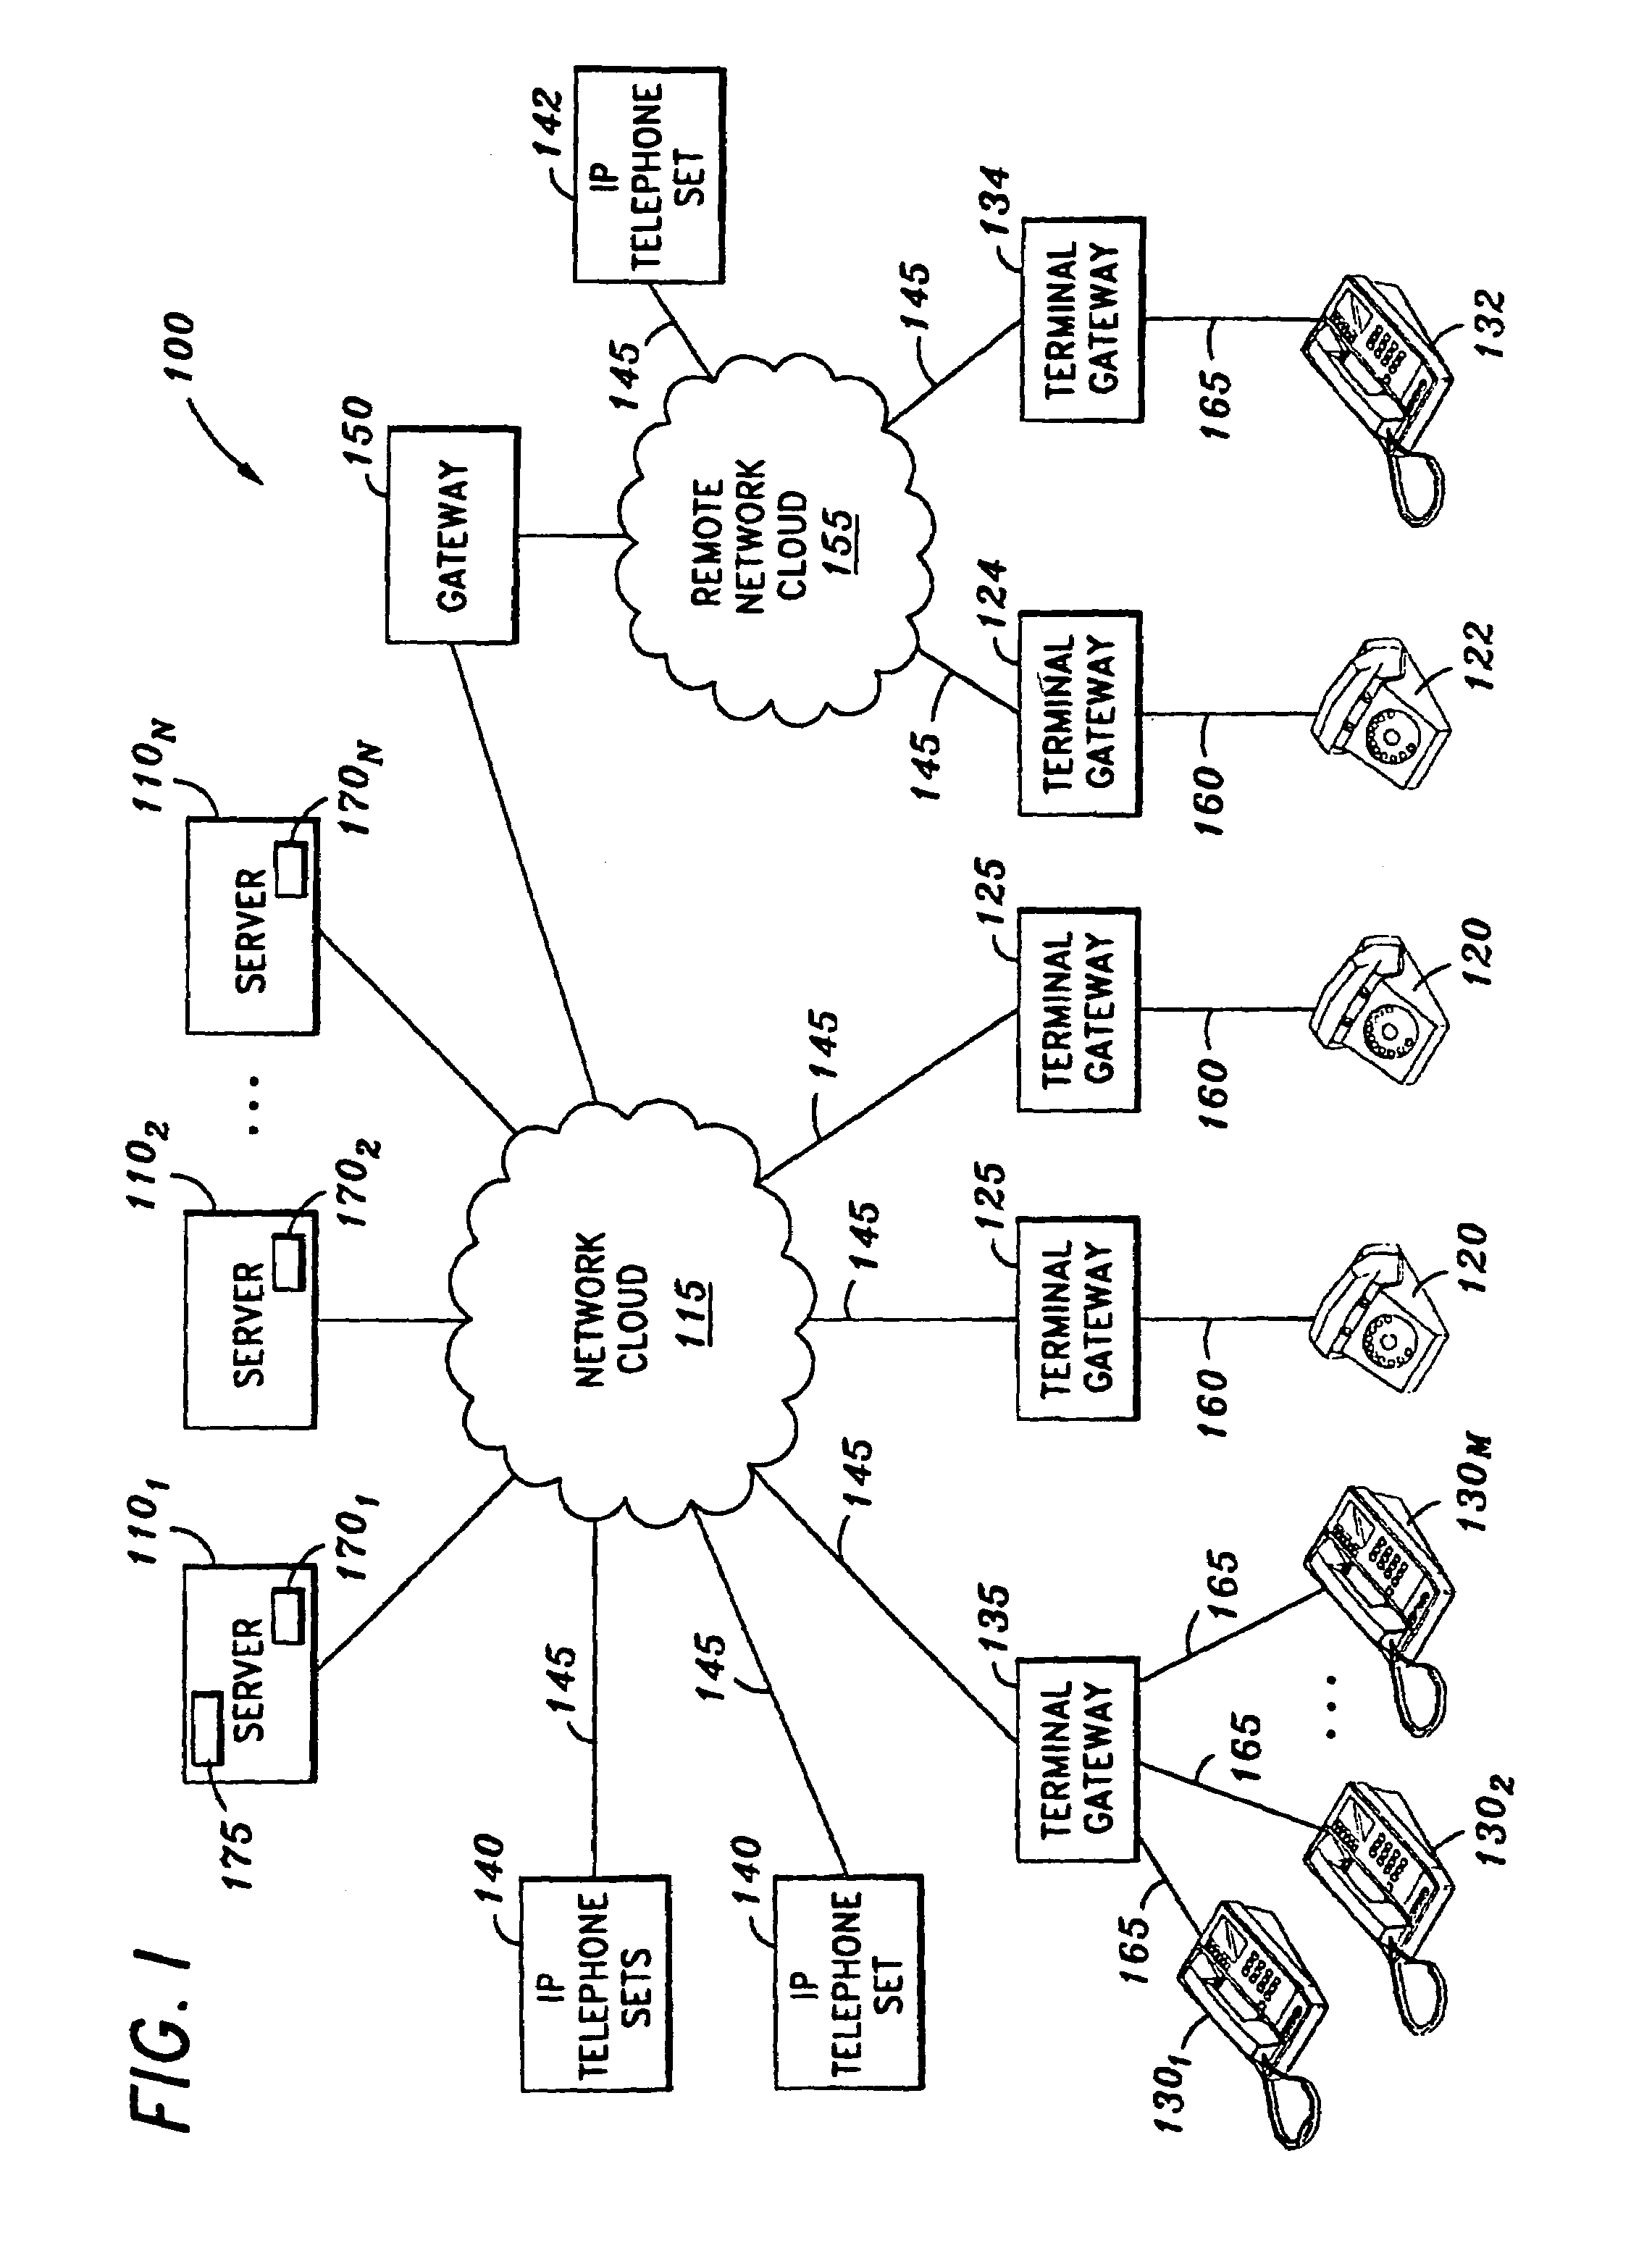 Multi-mode endpoint in a communication network system and methods thereof